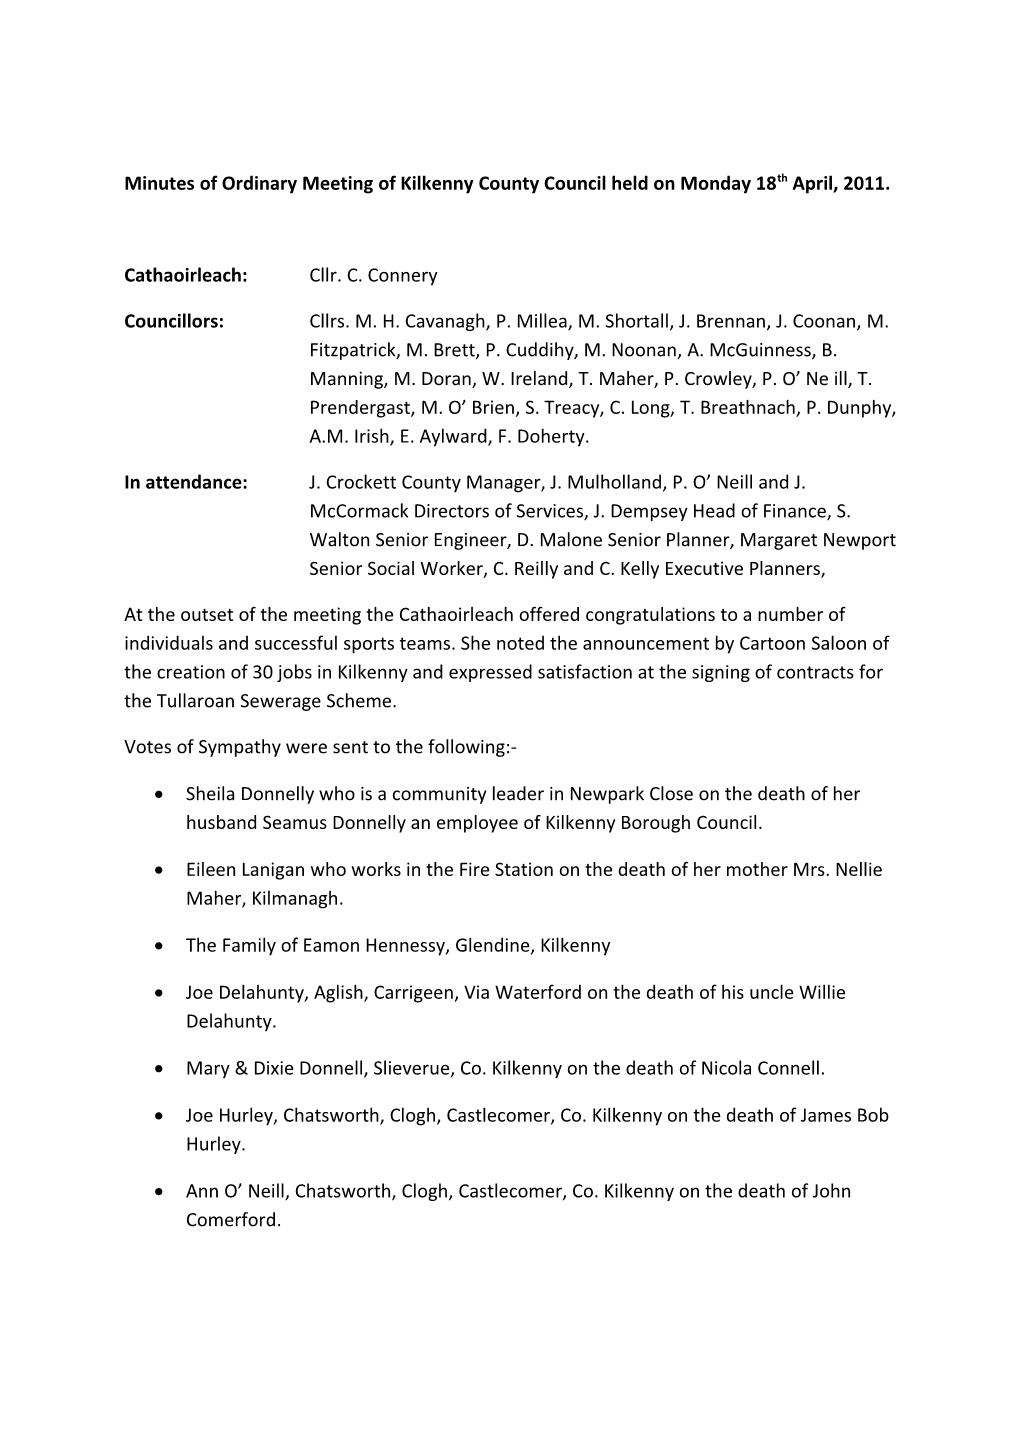 Minutes of Ordinary Meeting of Kilkenny County Council Held on Monday 18Th April, 2011